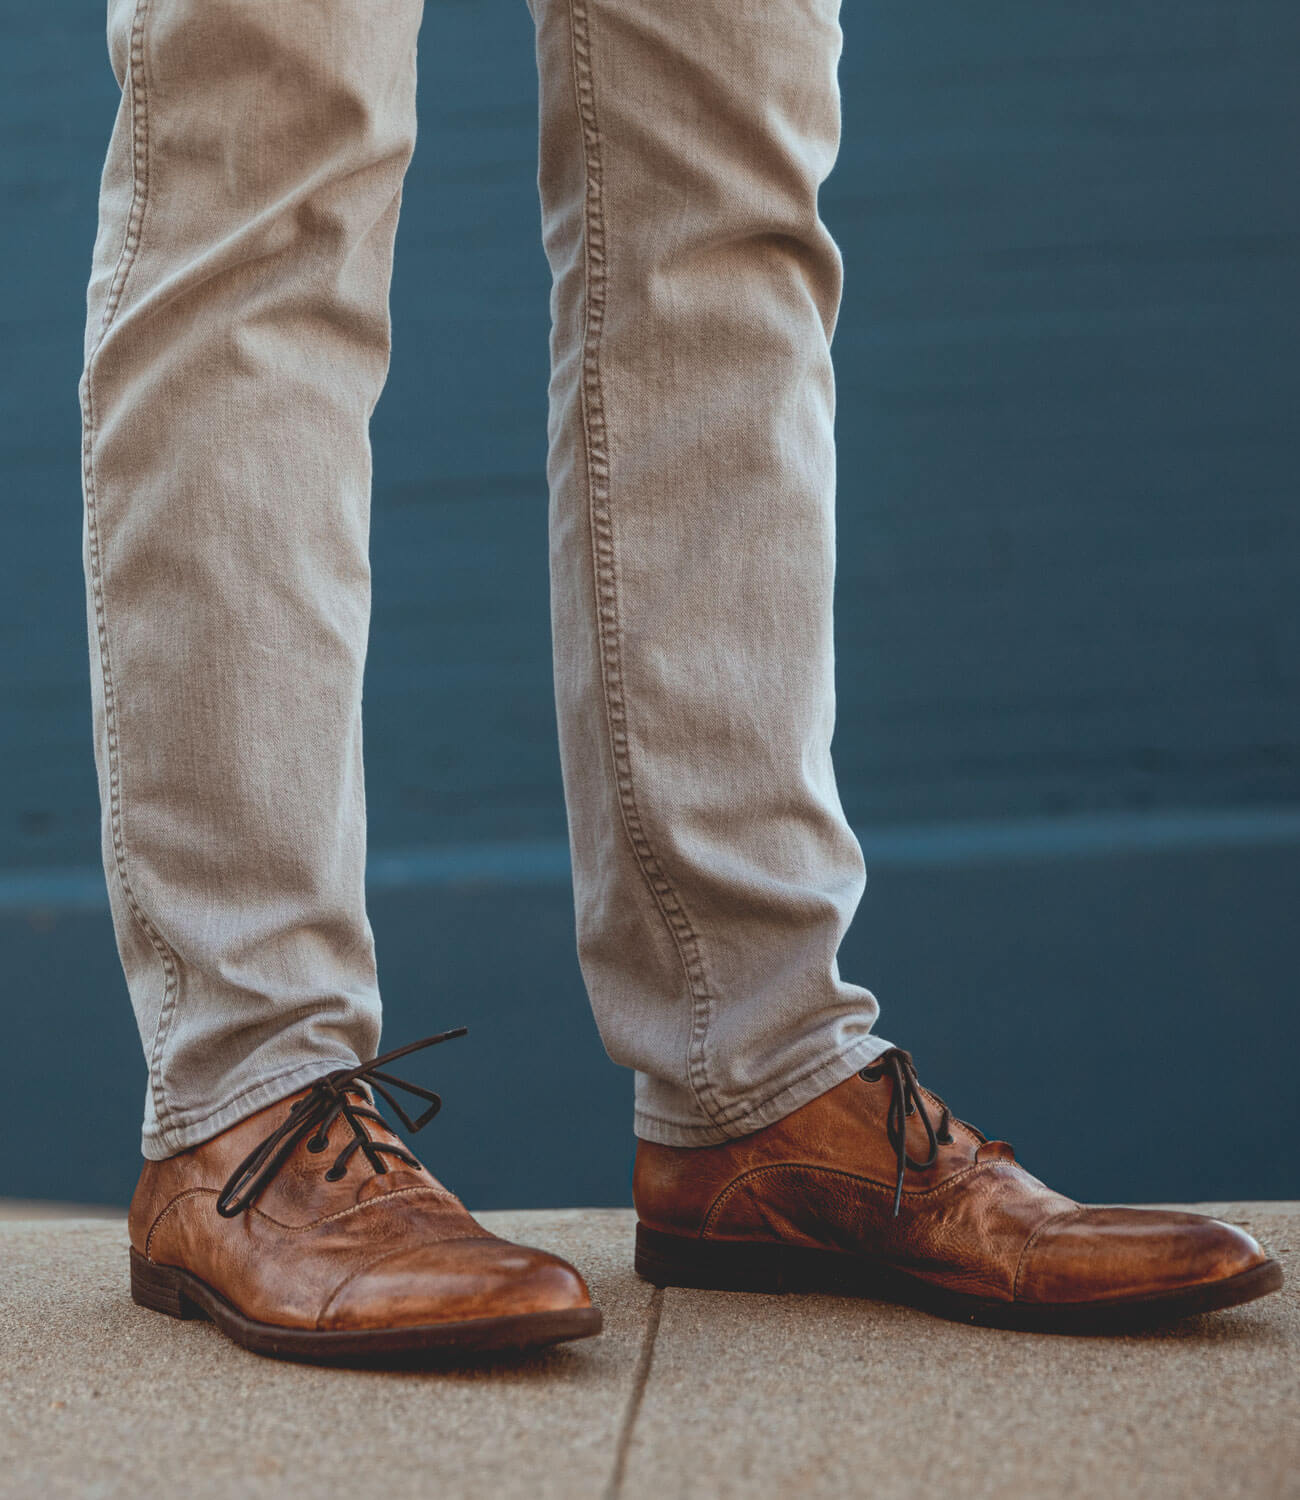 A man wearing a pair of brown Bed Stu Donatello shoes.